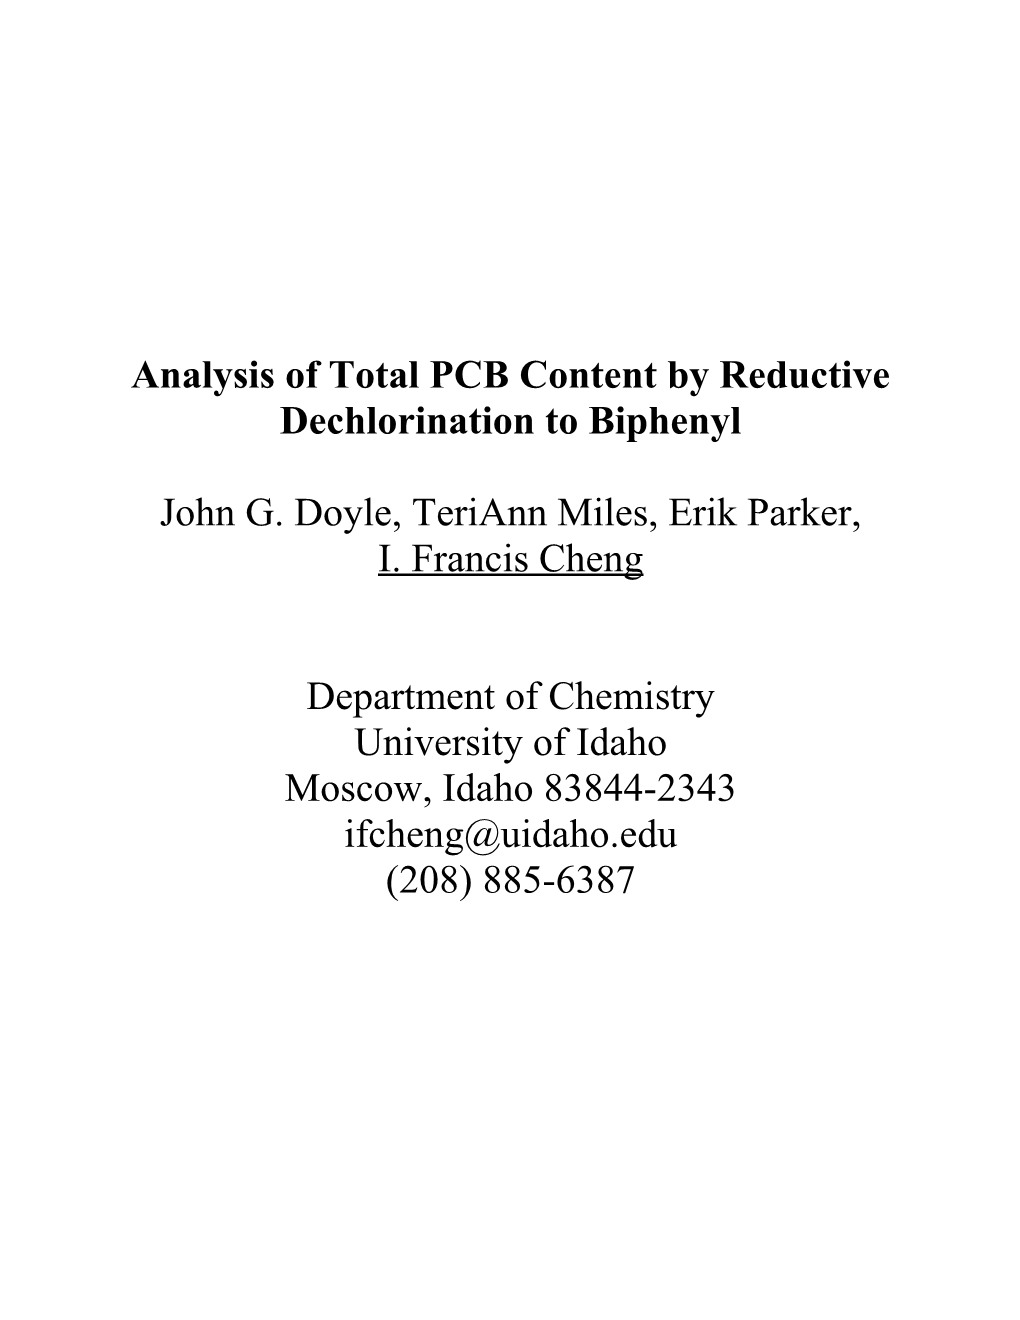 Analysis of Total PCB Content by Reductive Dechlorination to Biphenyl